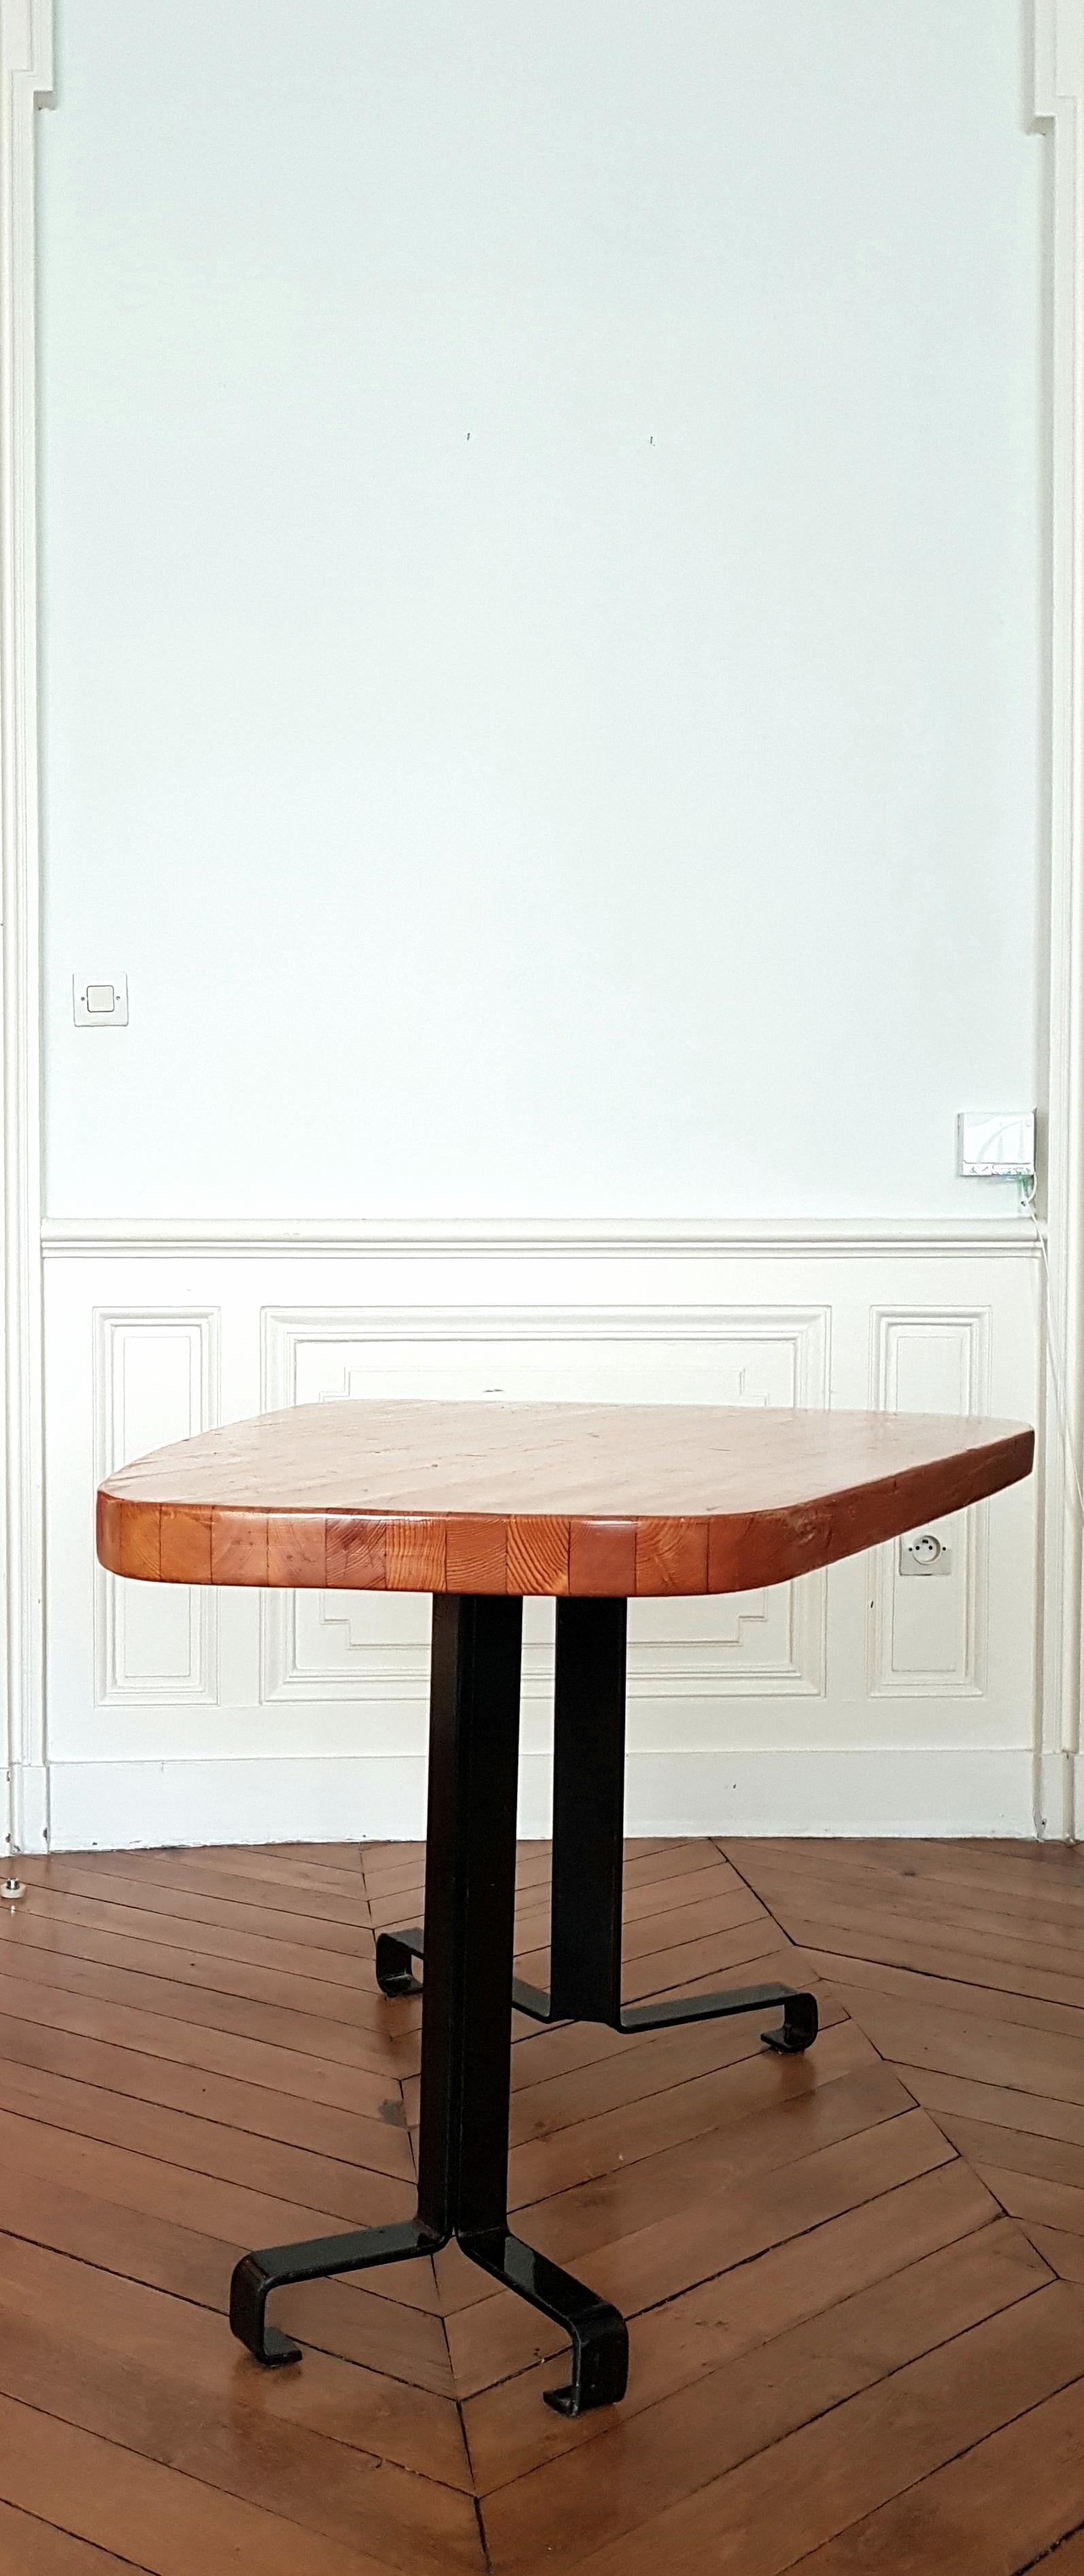 Charlotte Perriand freeform table in pinewood from 1960. This dining table is in a good used condition. It consists of a pinewood top and a base in black lacquered metal adjustable on one foot. A dining table by Charlotte Perriand. Measures: 126 x